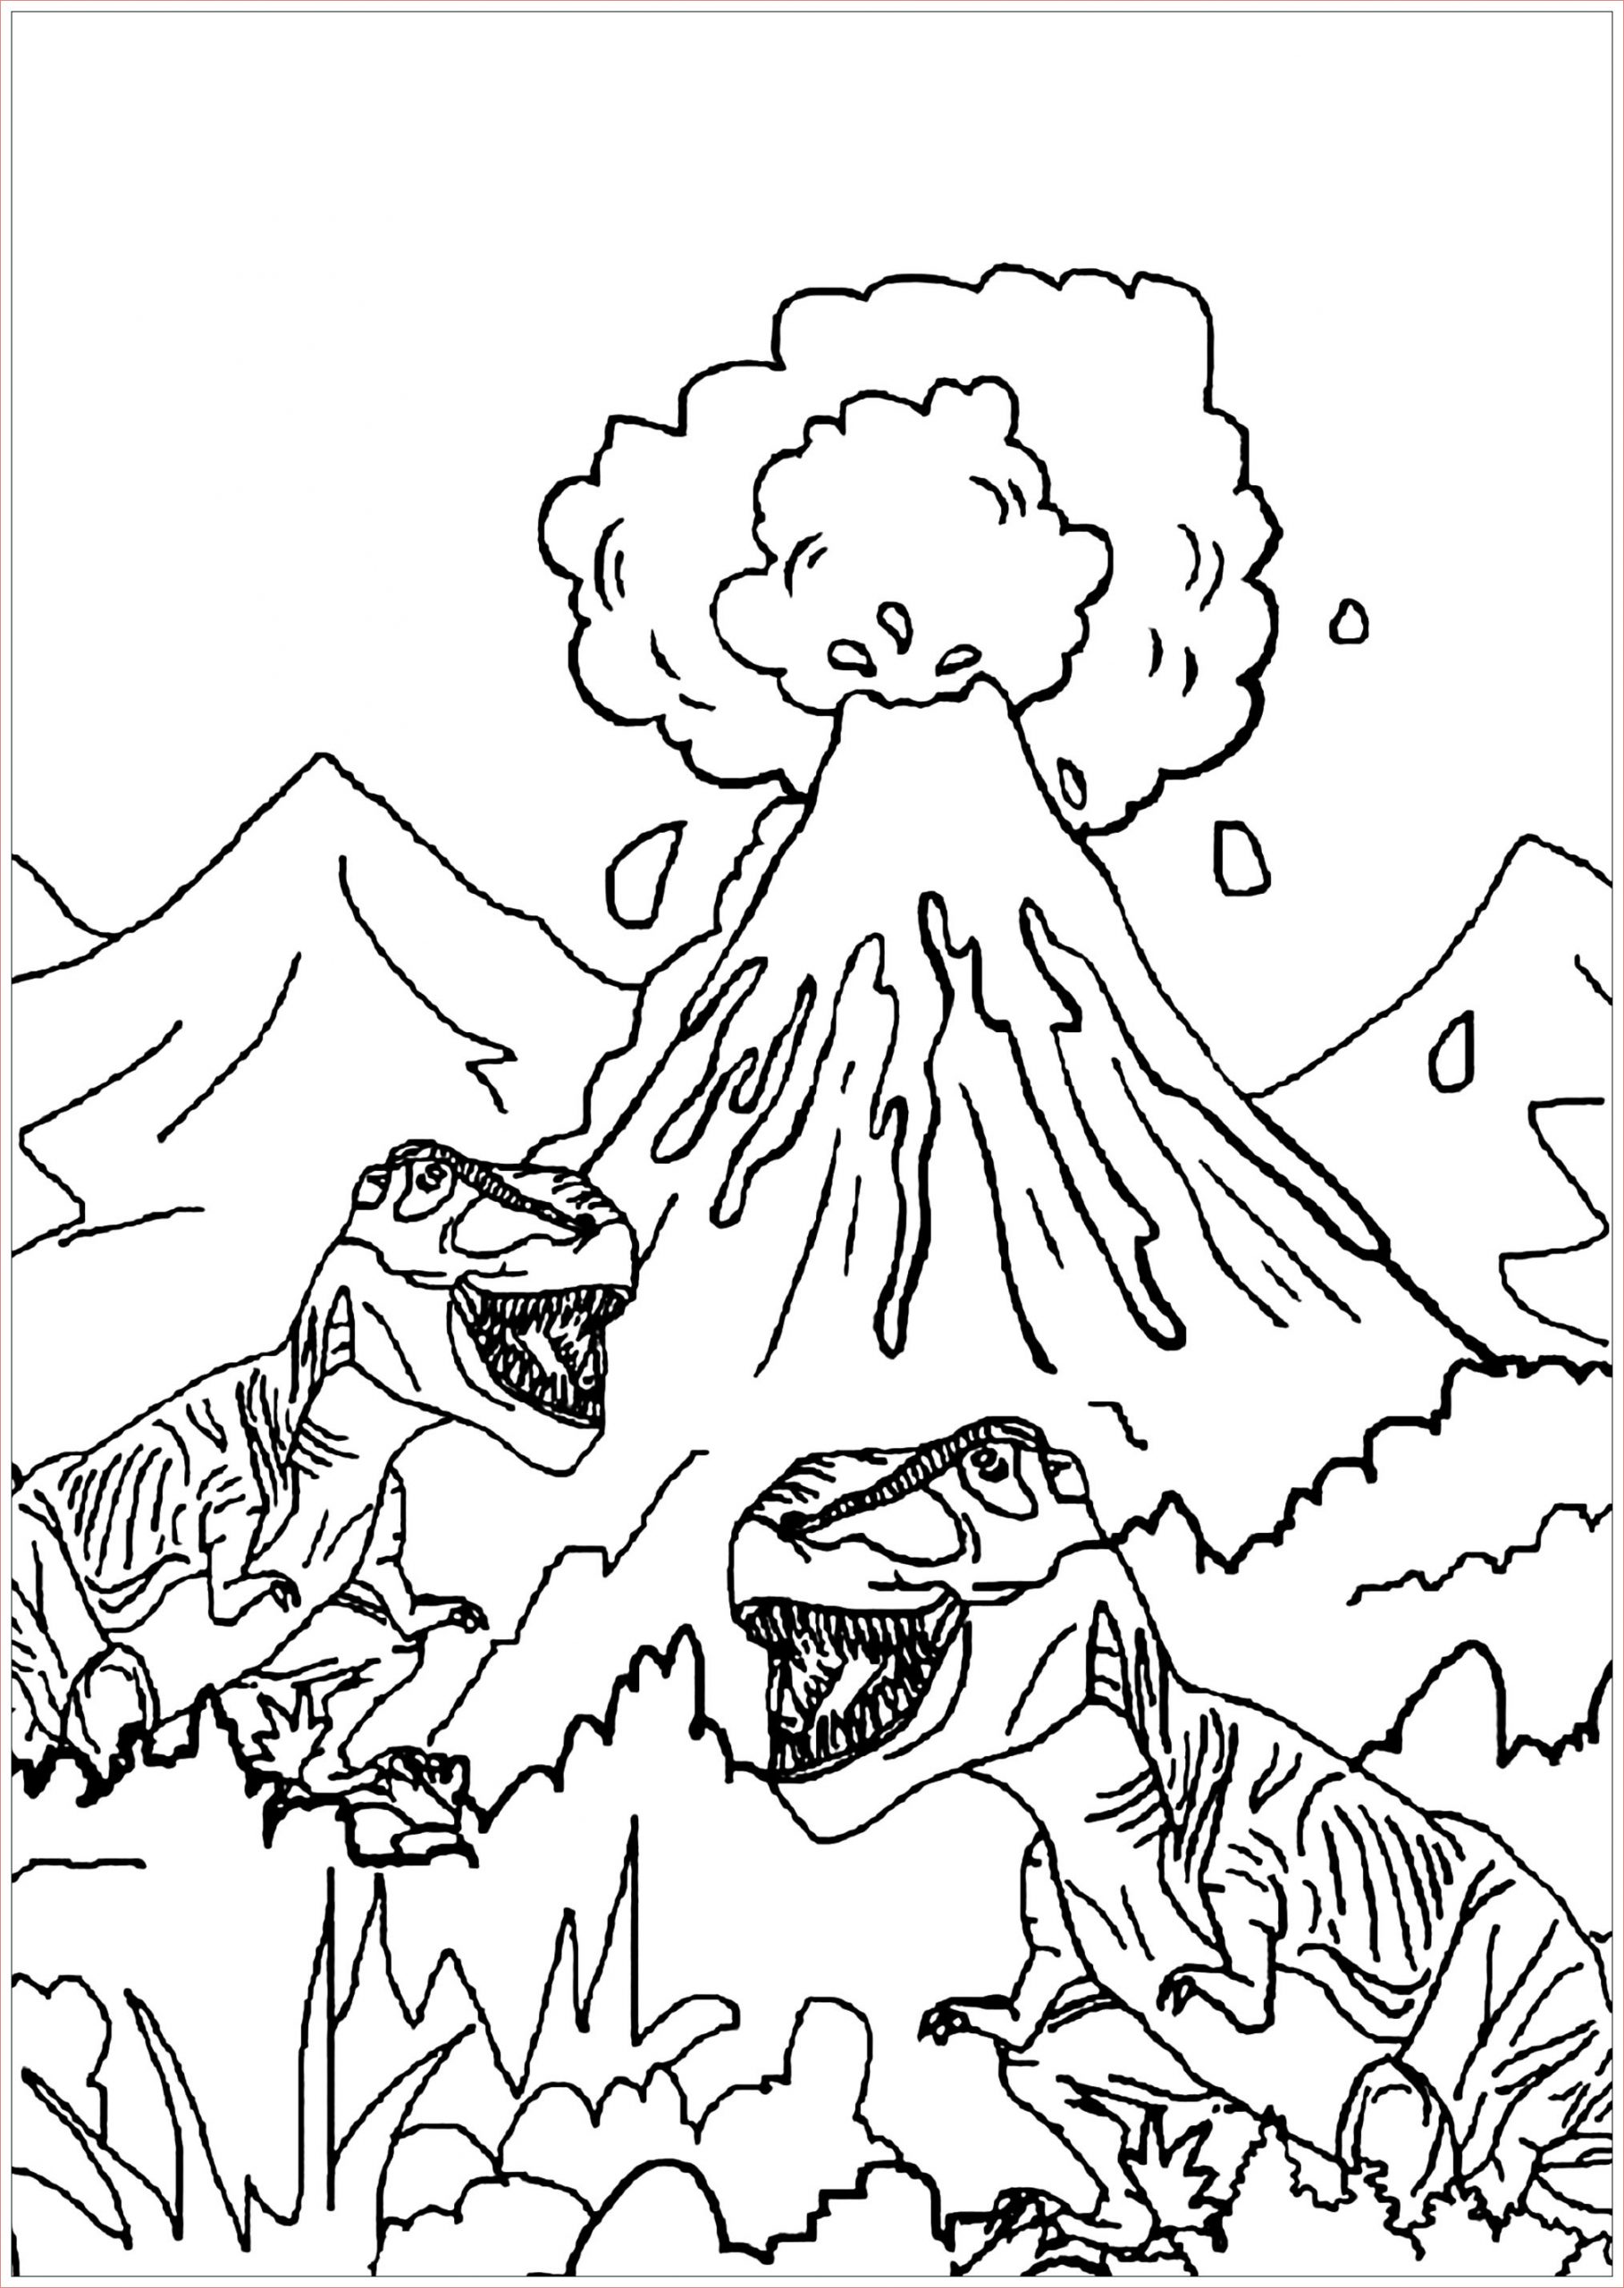 image=dinosaurs coloring pages for children dinosaurs 1